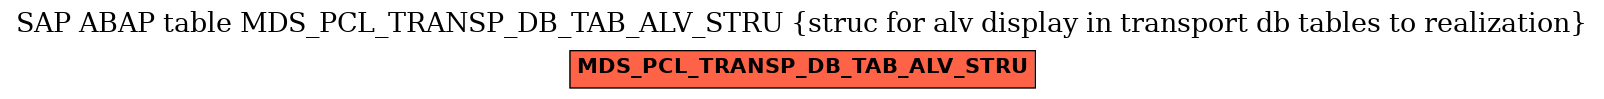 E-R Diagram for table MDS_PCL_TRANSP_DB_TAB_ALV_STRU (struc for alv display in transport db tables to realization)